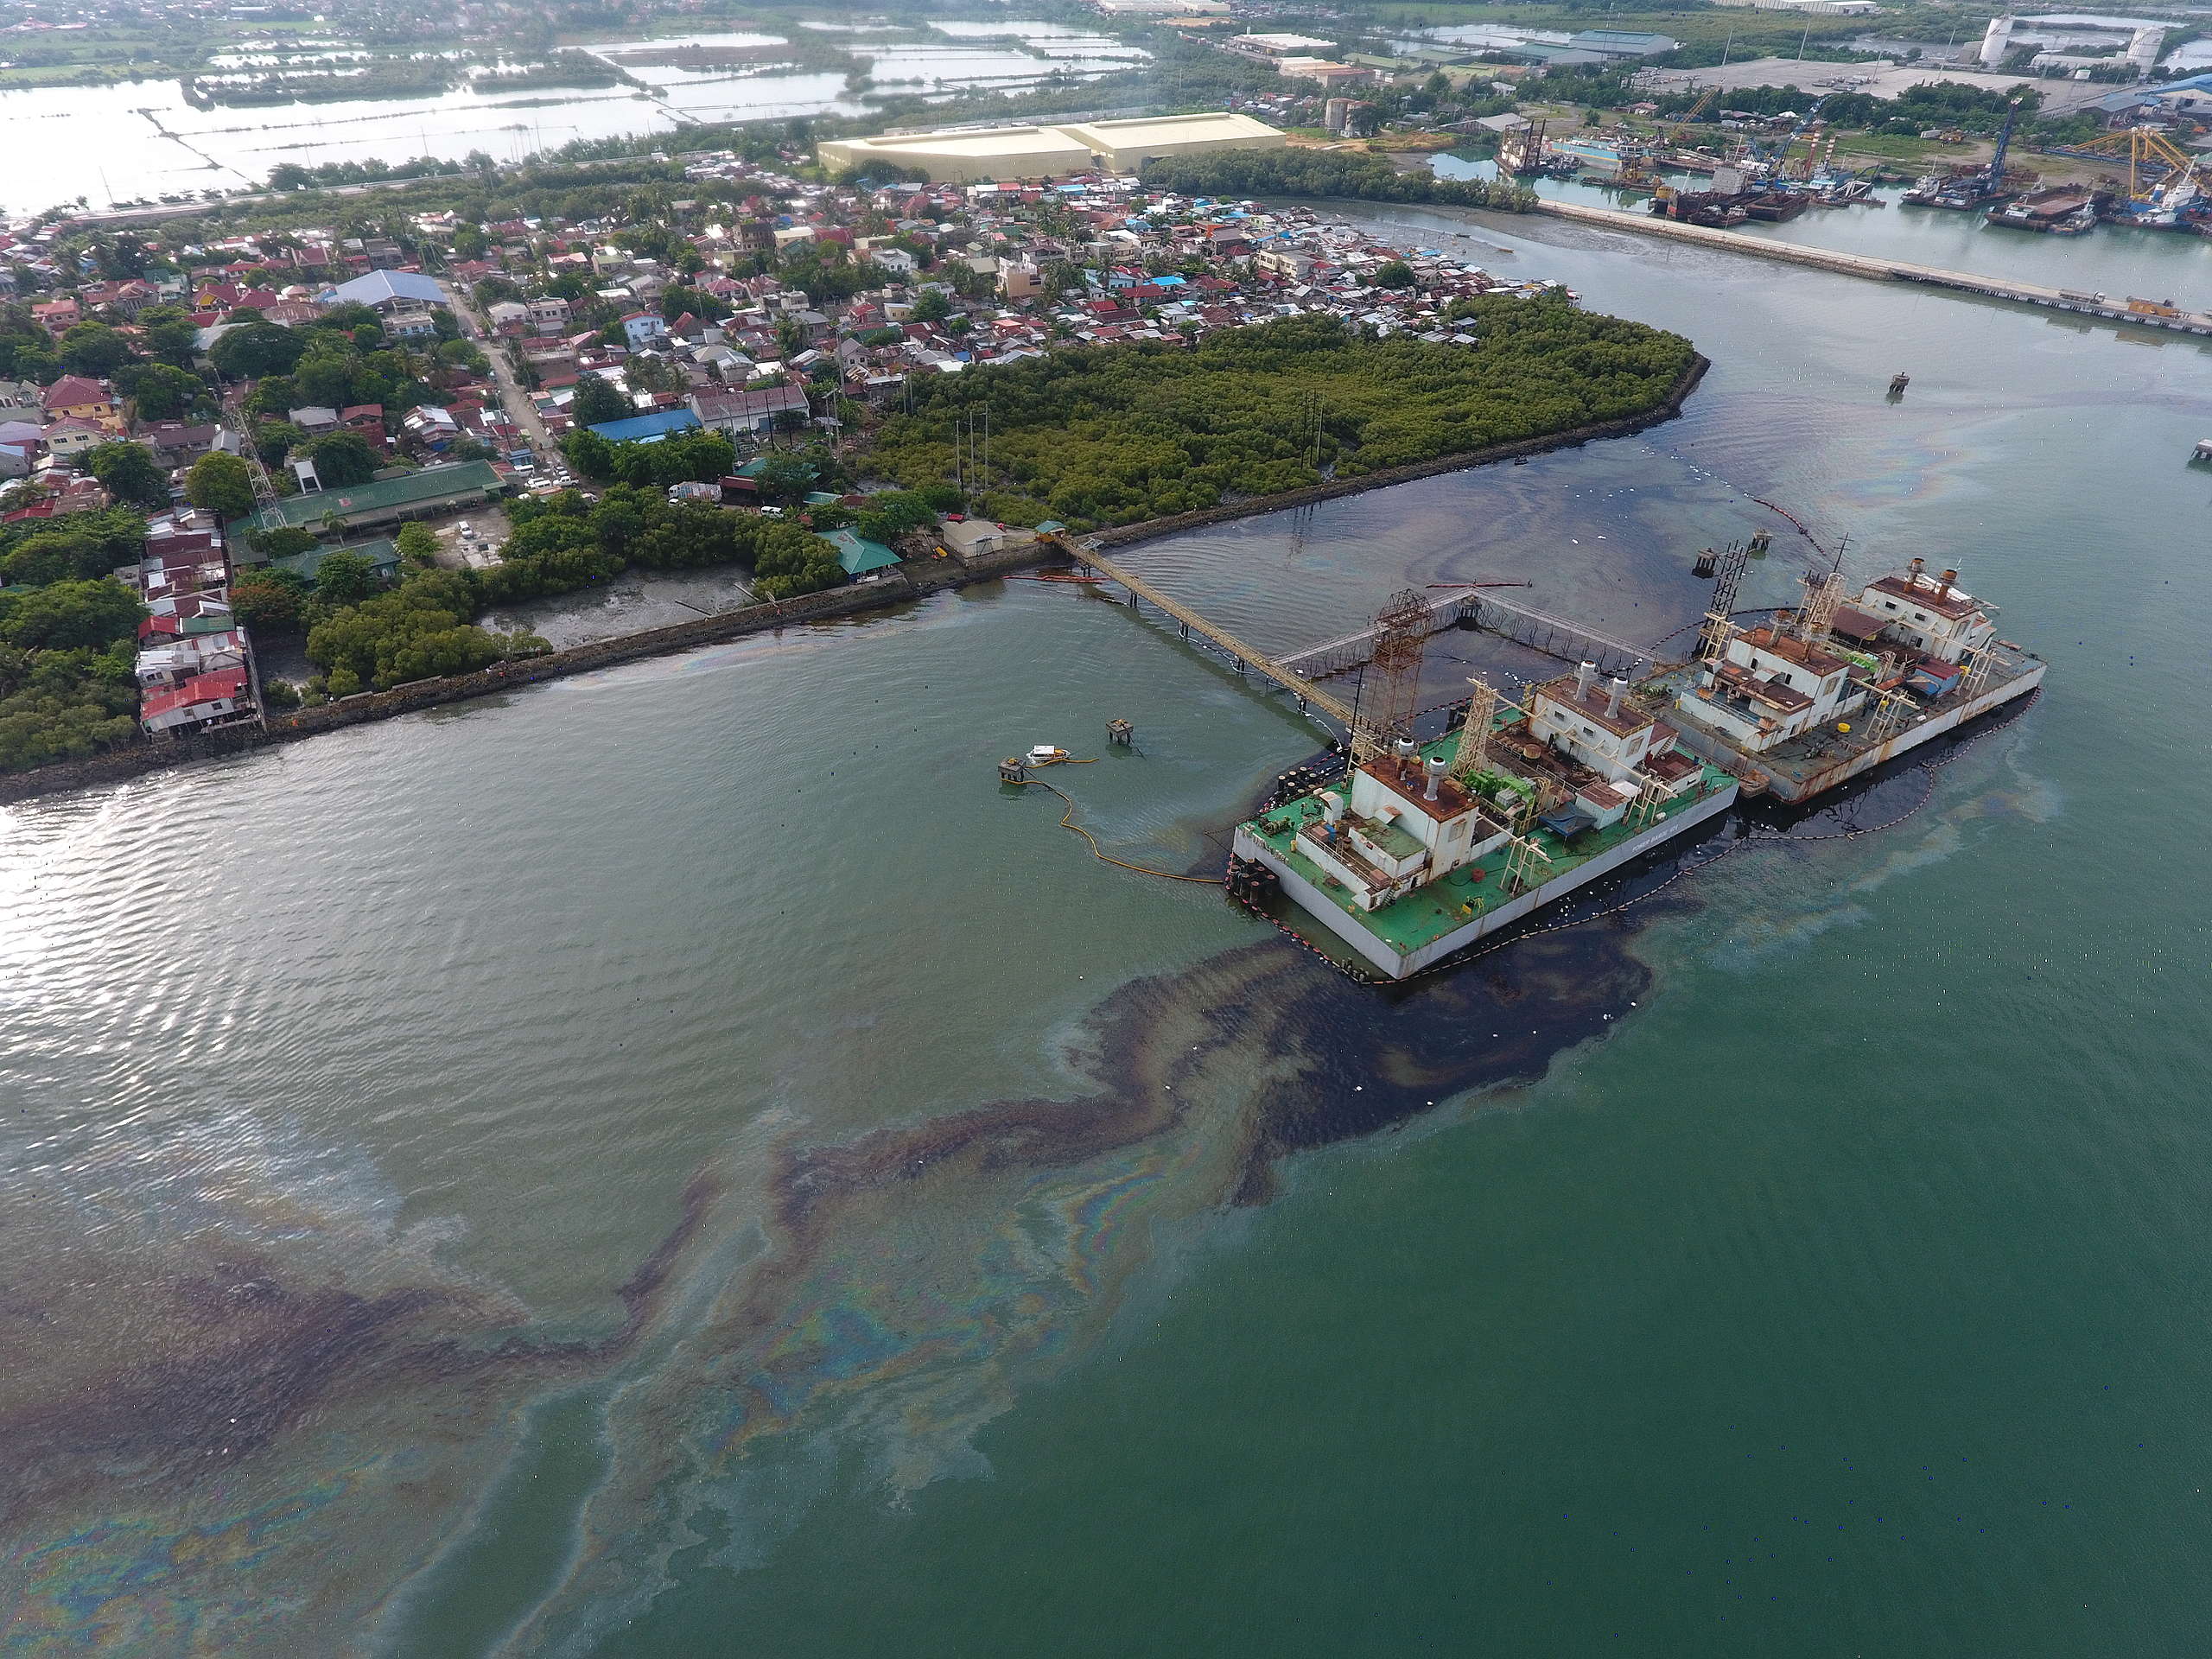 Greenpeace statement on Iloilo power barge oil spill Greenpeace Philippines